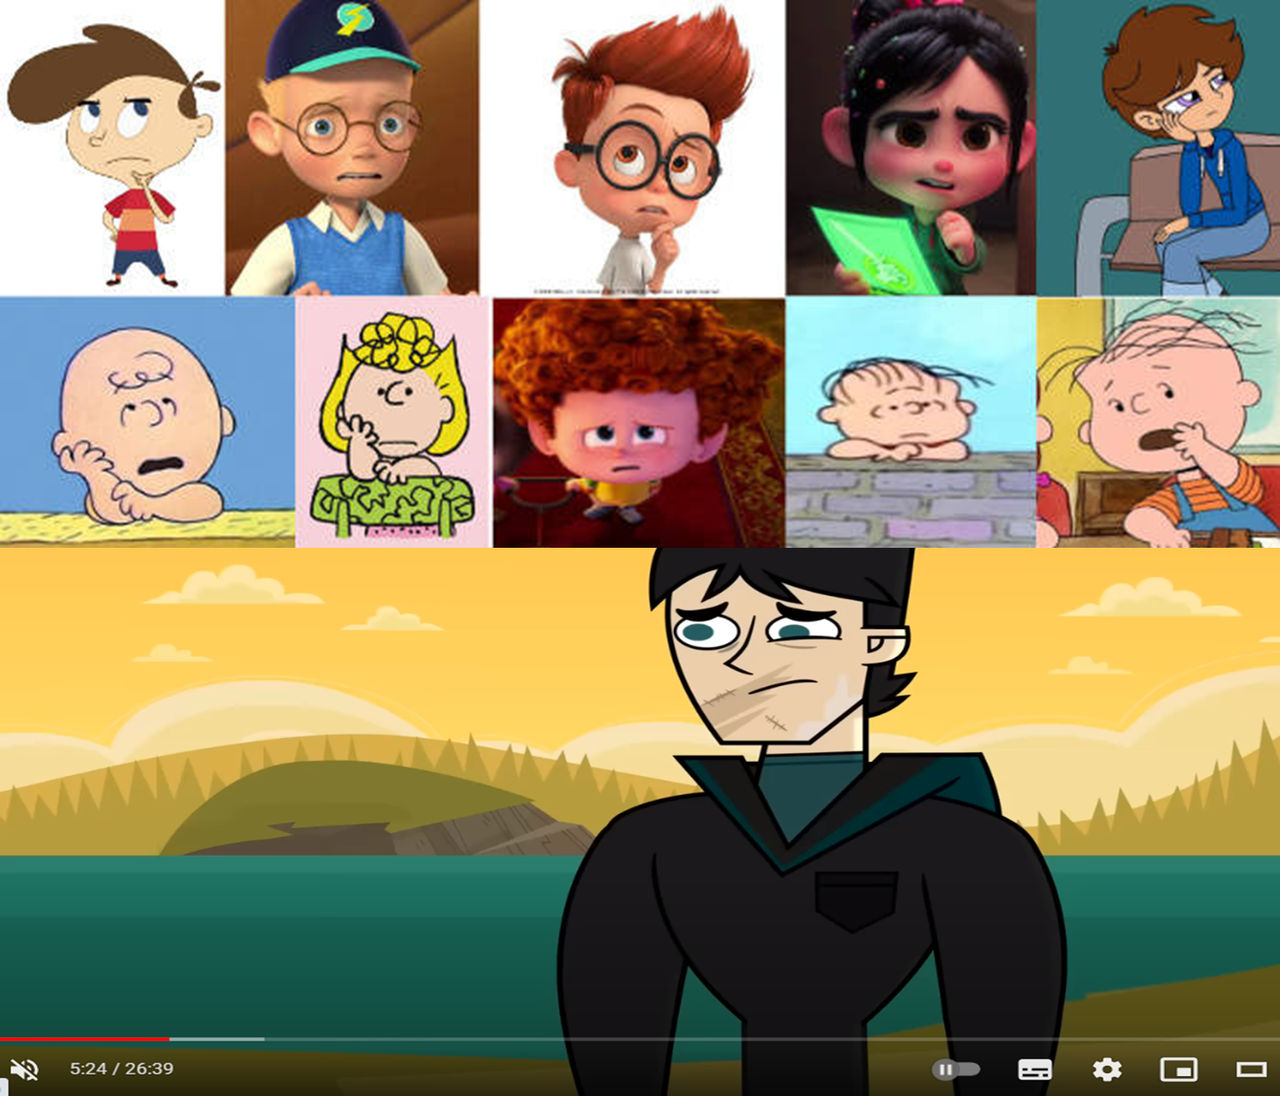 10 Kids React To Tom's Face Reveal by Nicolefrancesca on DeviantArt